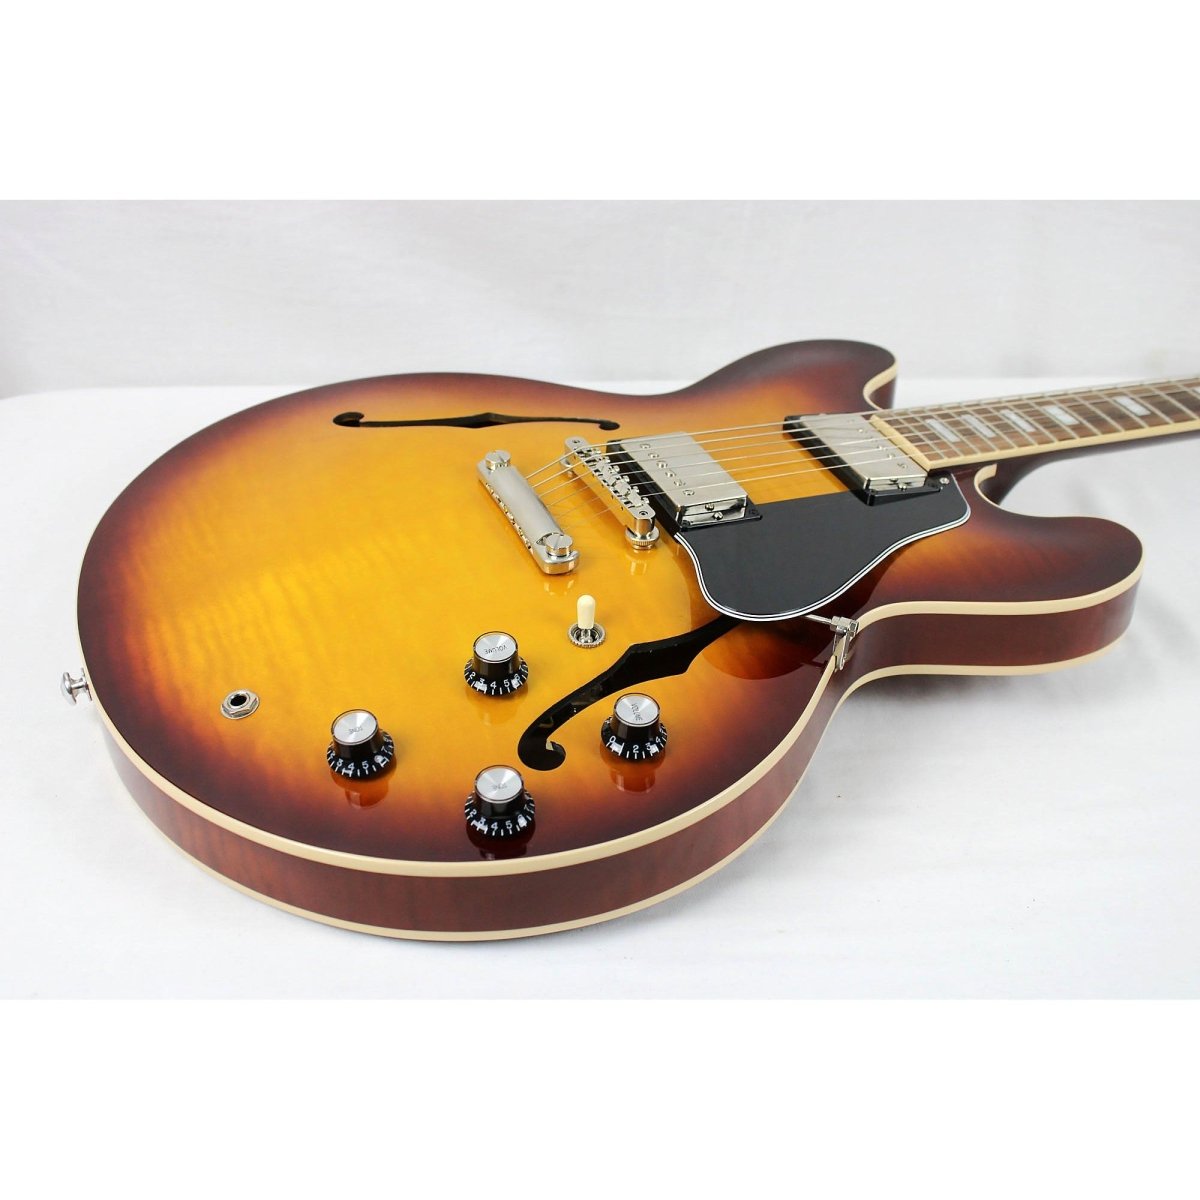 2021 Gibson ES-335 Figured w/ Block Inlays - Iced Tea **USED - EXCELLENT** - Leitz Music--215410249